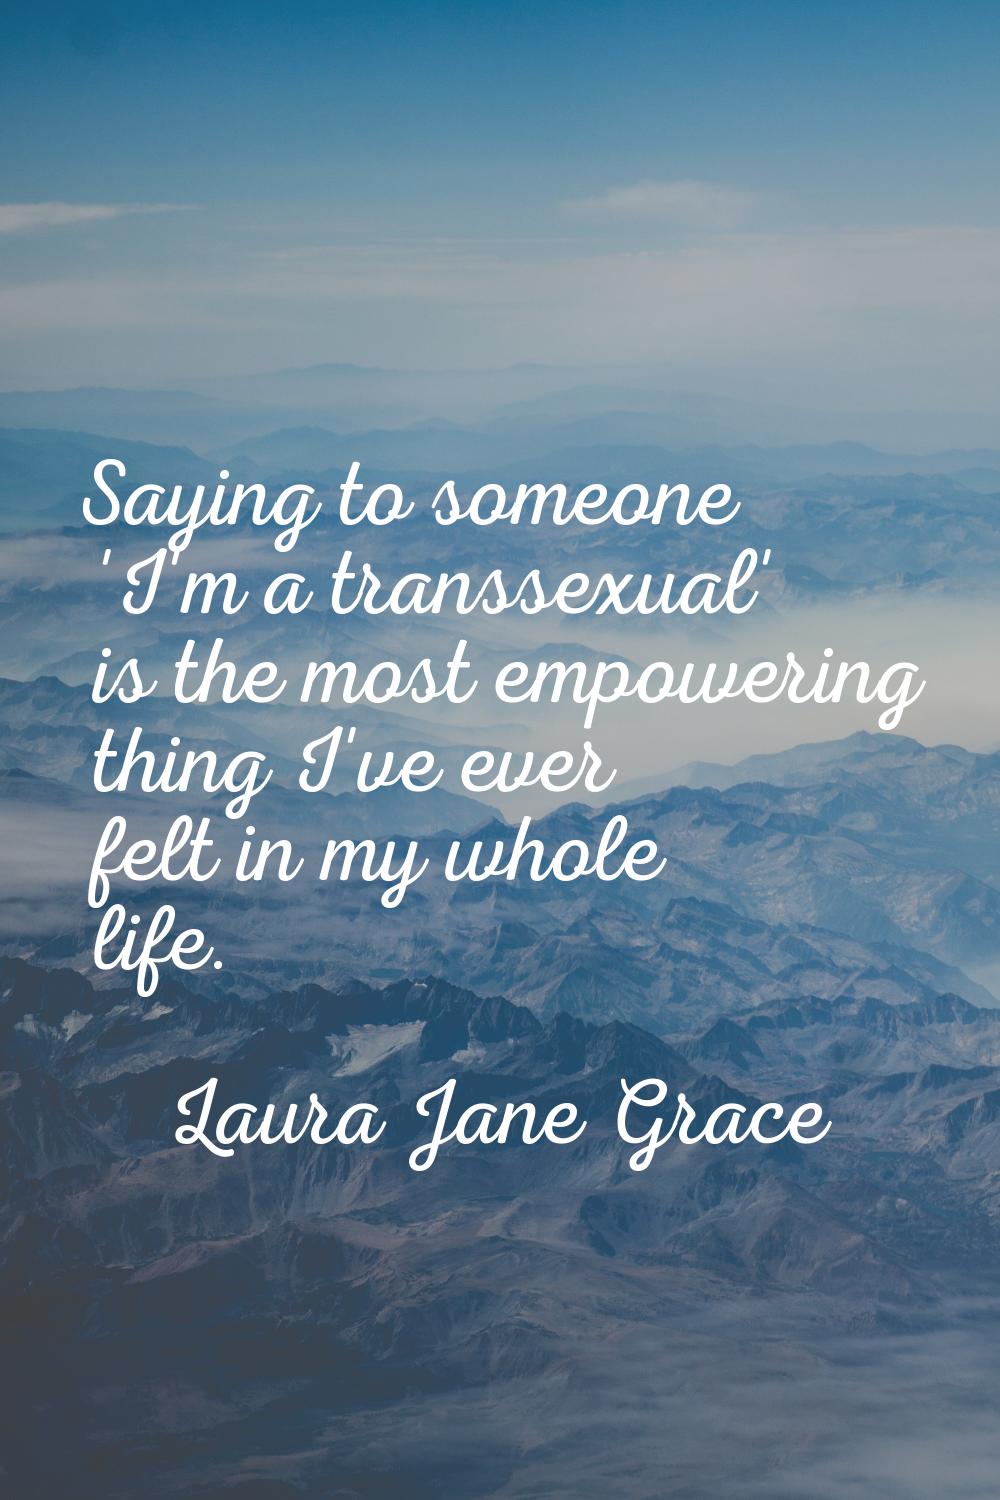 Saying to someone 'I'm a transsexual' is the most empowering thing I've ever felt in my whole life.